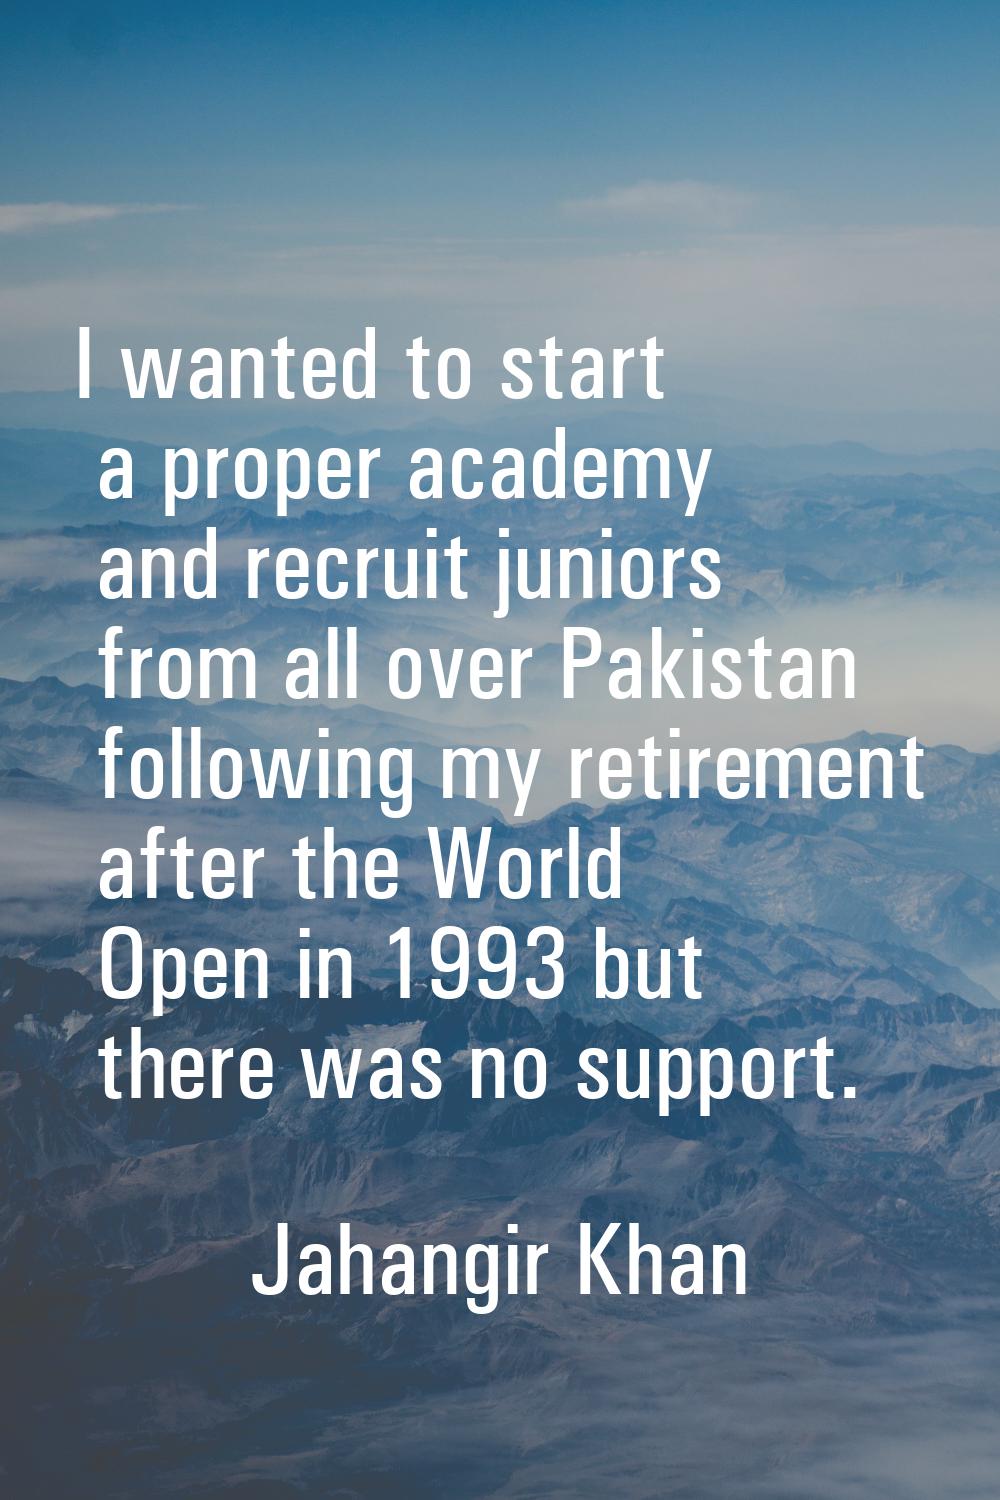 I wanted to start a proper academy and recruit juniors from all over Pakistan following my retireme